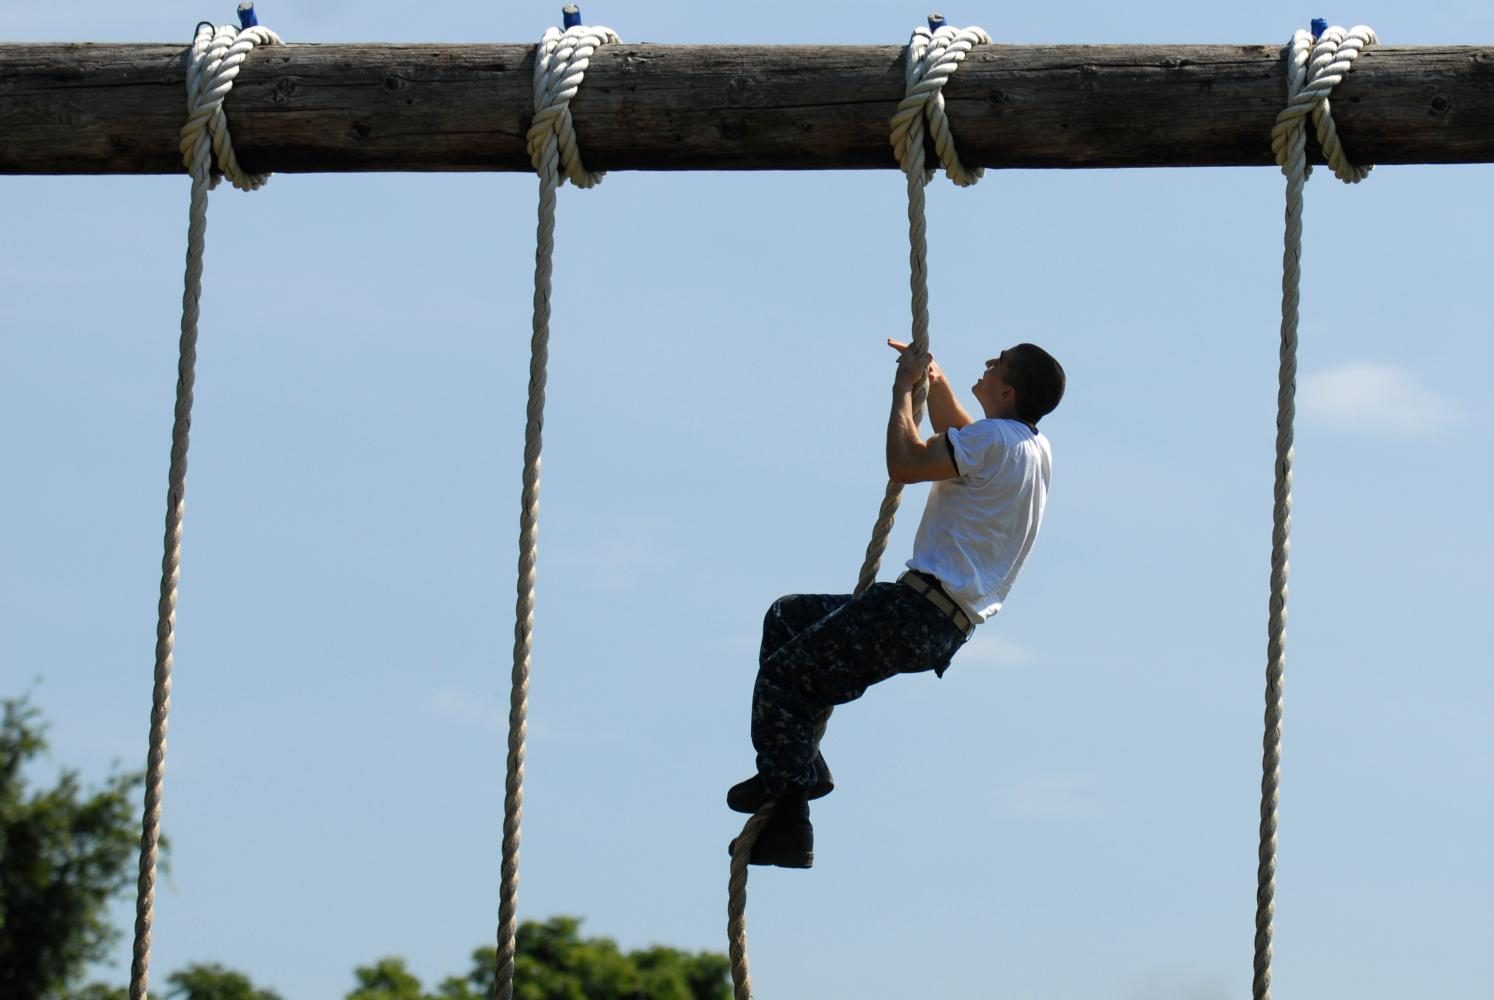 ANNAPOLIS, Md. (July 12, 2011) A Plebe in the U.S. Naval Academy Class of 2015 makes his way through the schools obstacle course. (U.S. Navy photo by Mass Communication Specialist 1st Class Chad Runge/Released)
